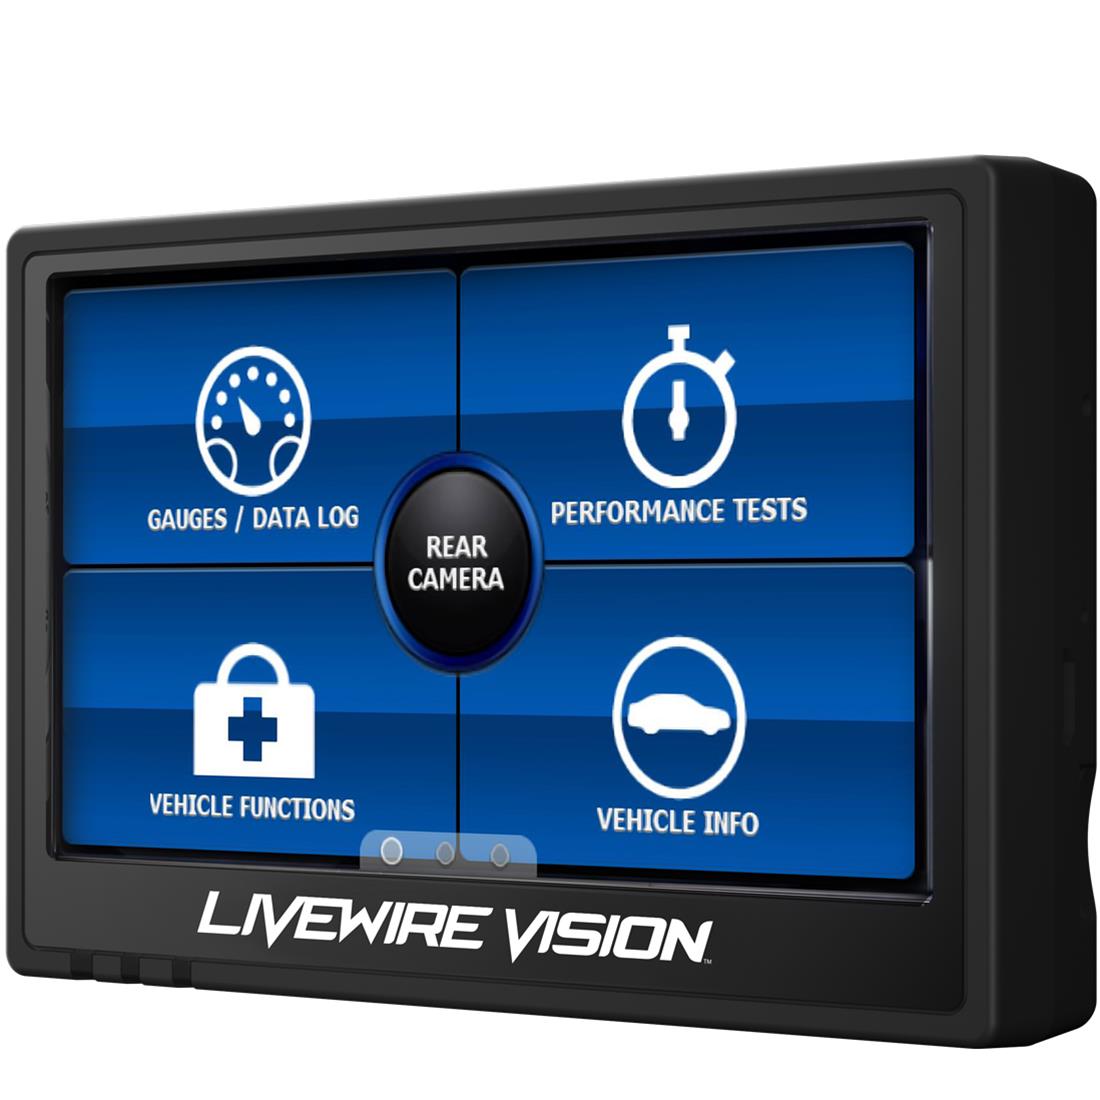 SCT Performance 5015P SCT Livewire TS Plus Performance Programmer and  Monitors | Summit Racing